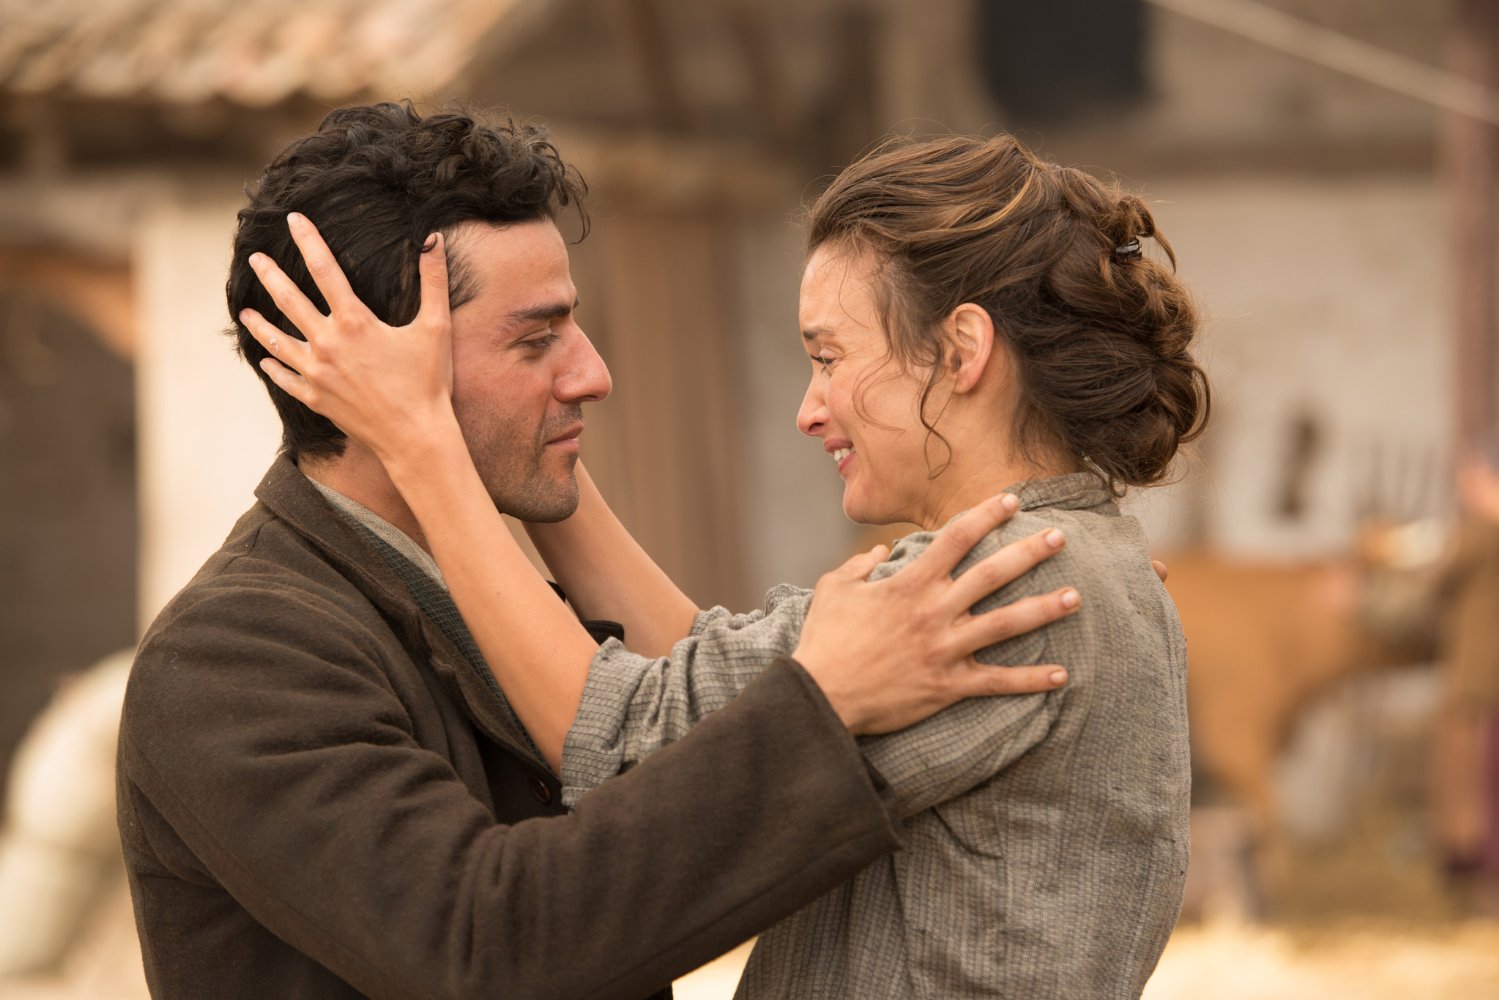 THE PROMISE Focuses Too Heavily on Melodrama